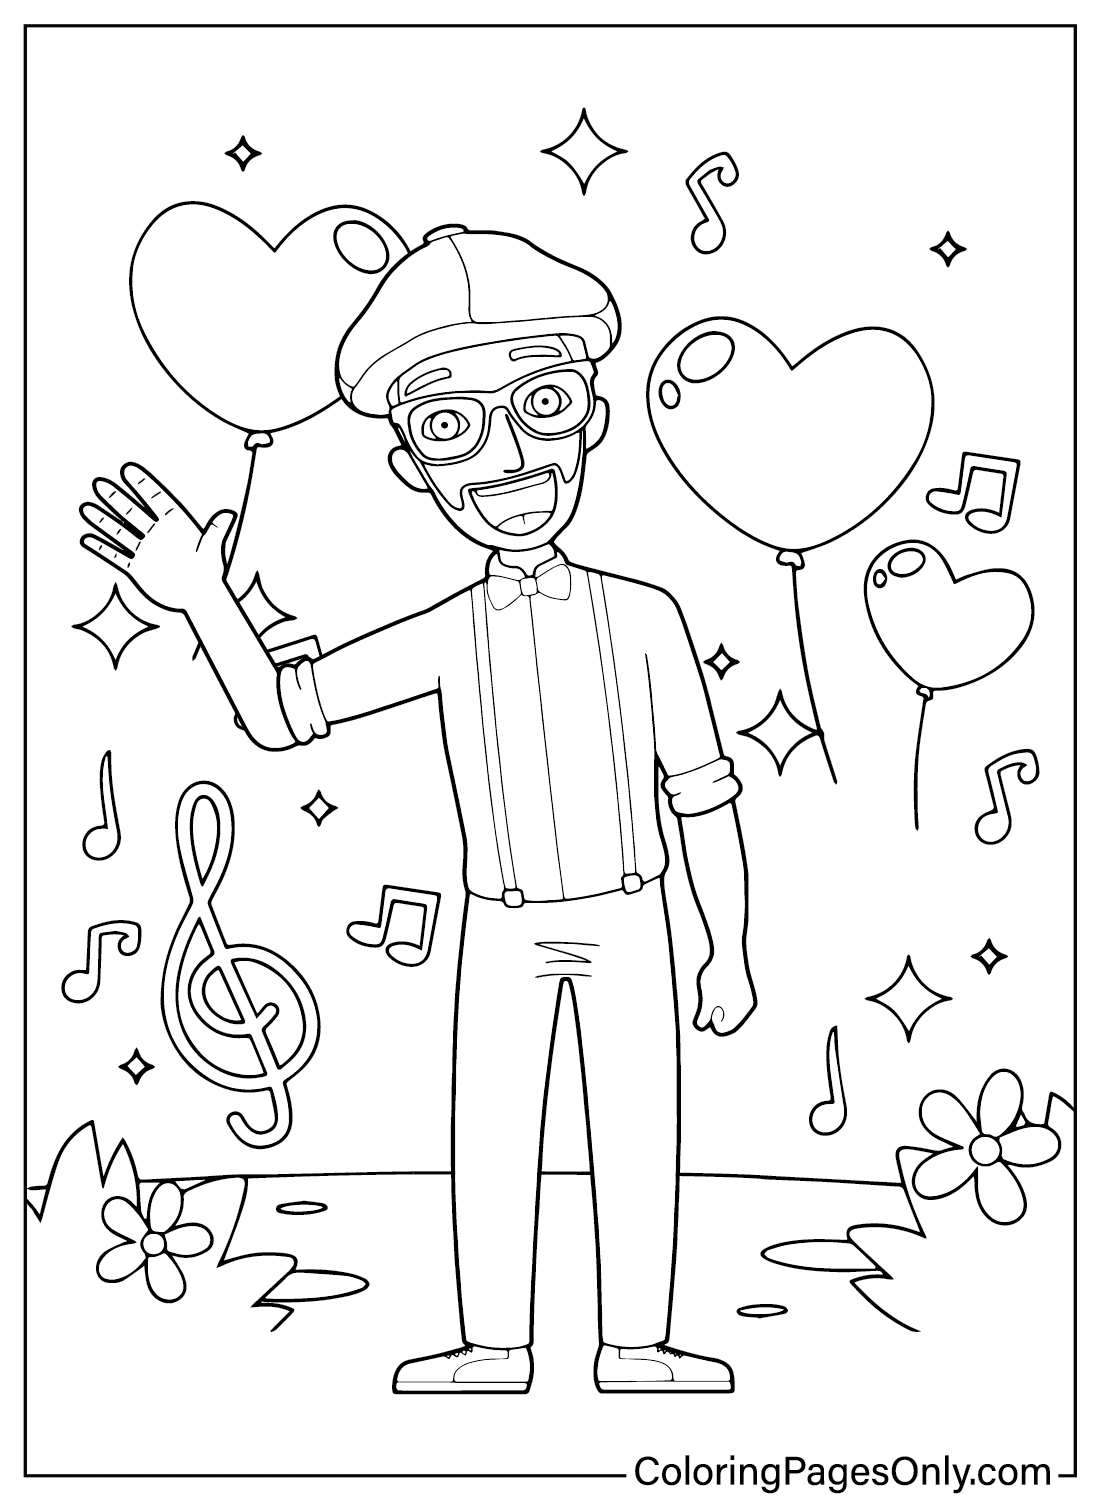 Blippi Picture to Color from Blippi